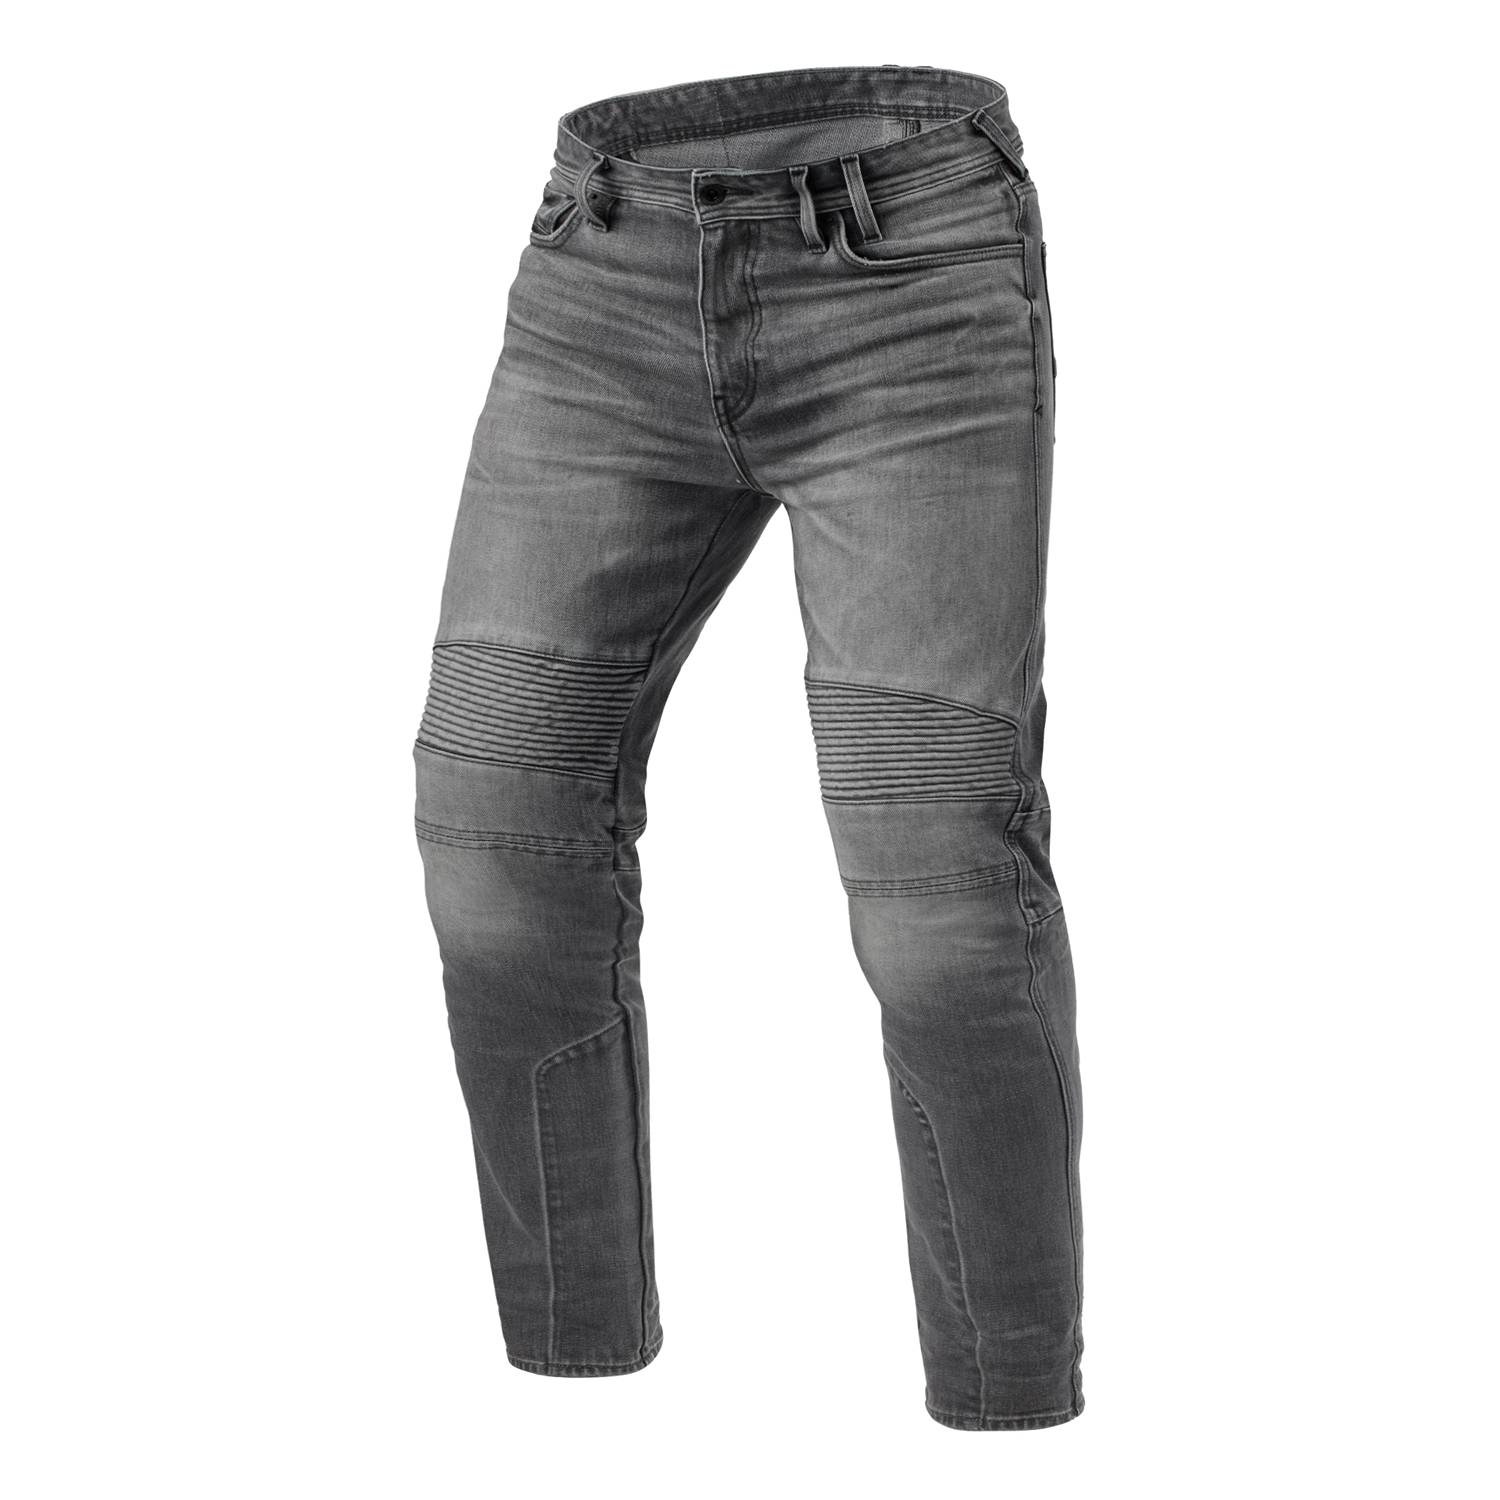 Image of EU REV'IT! Jeans Moto 2 TF Medium Grey Used L36 Motorcycle Jeans Taille L36/W36